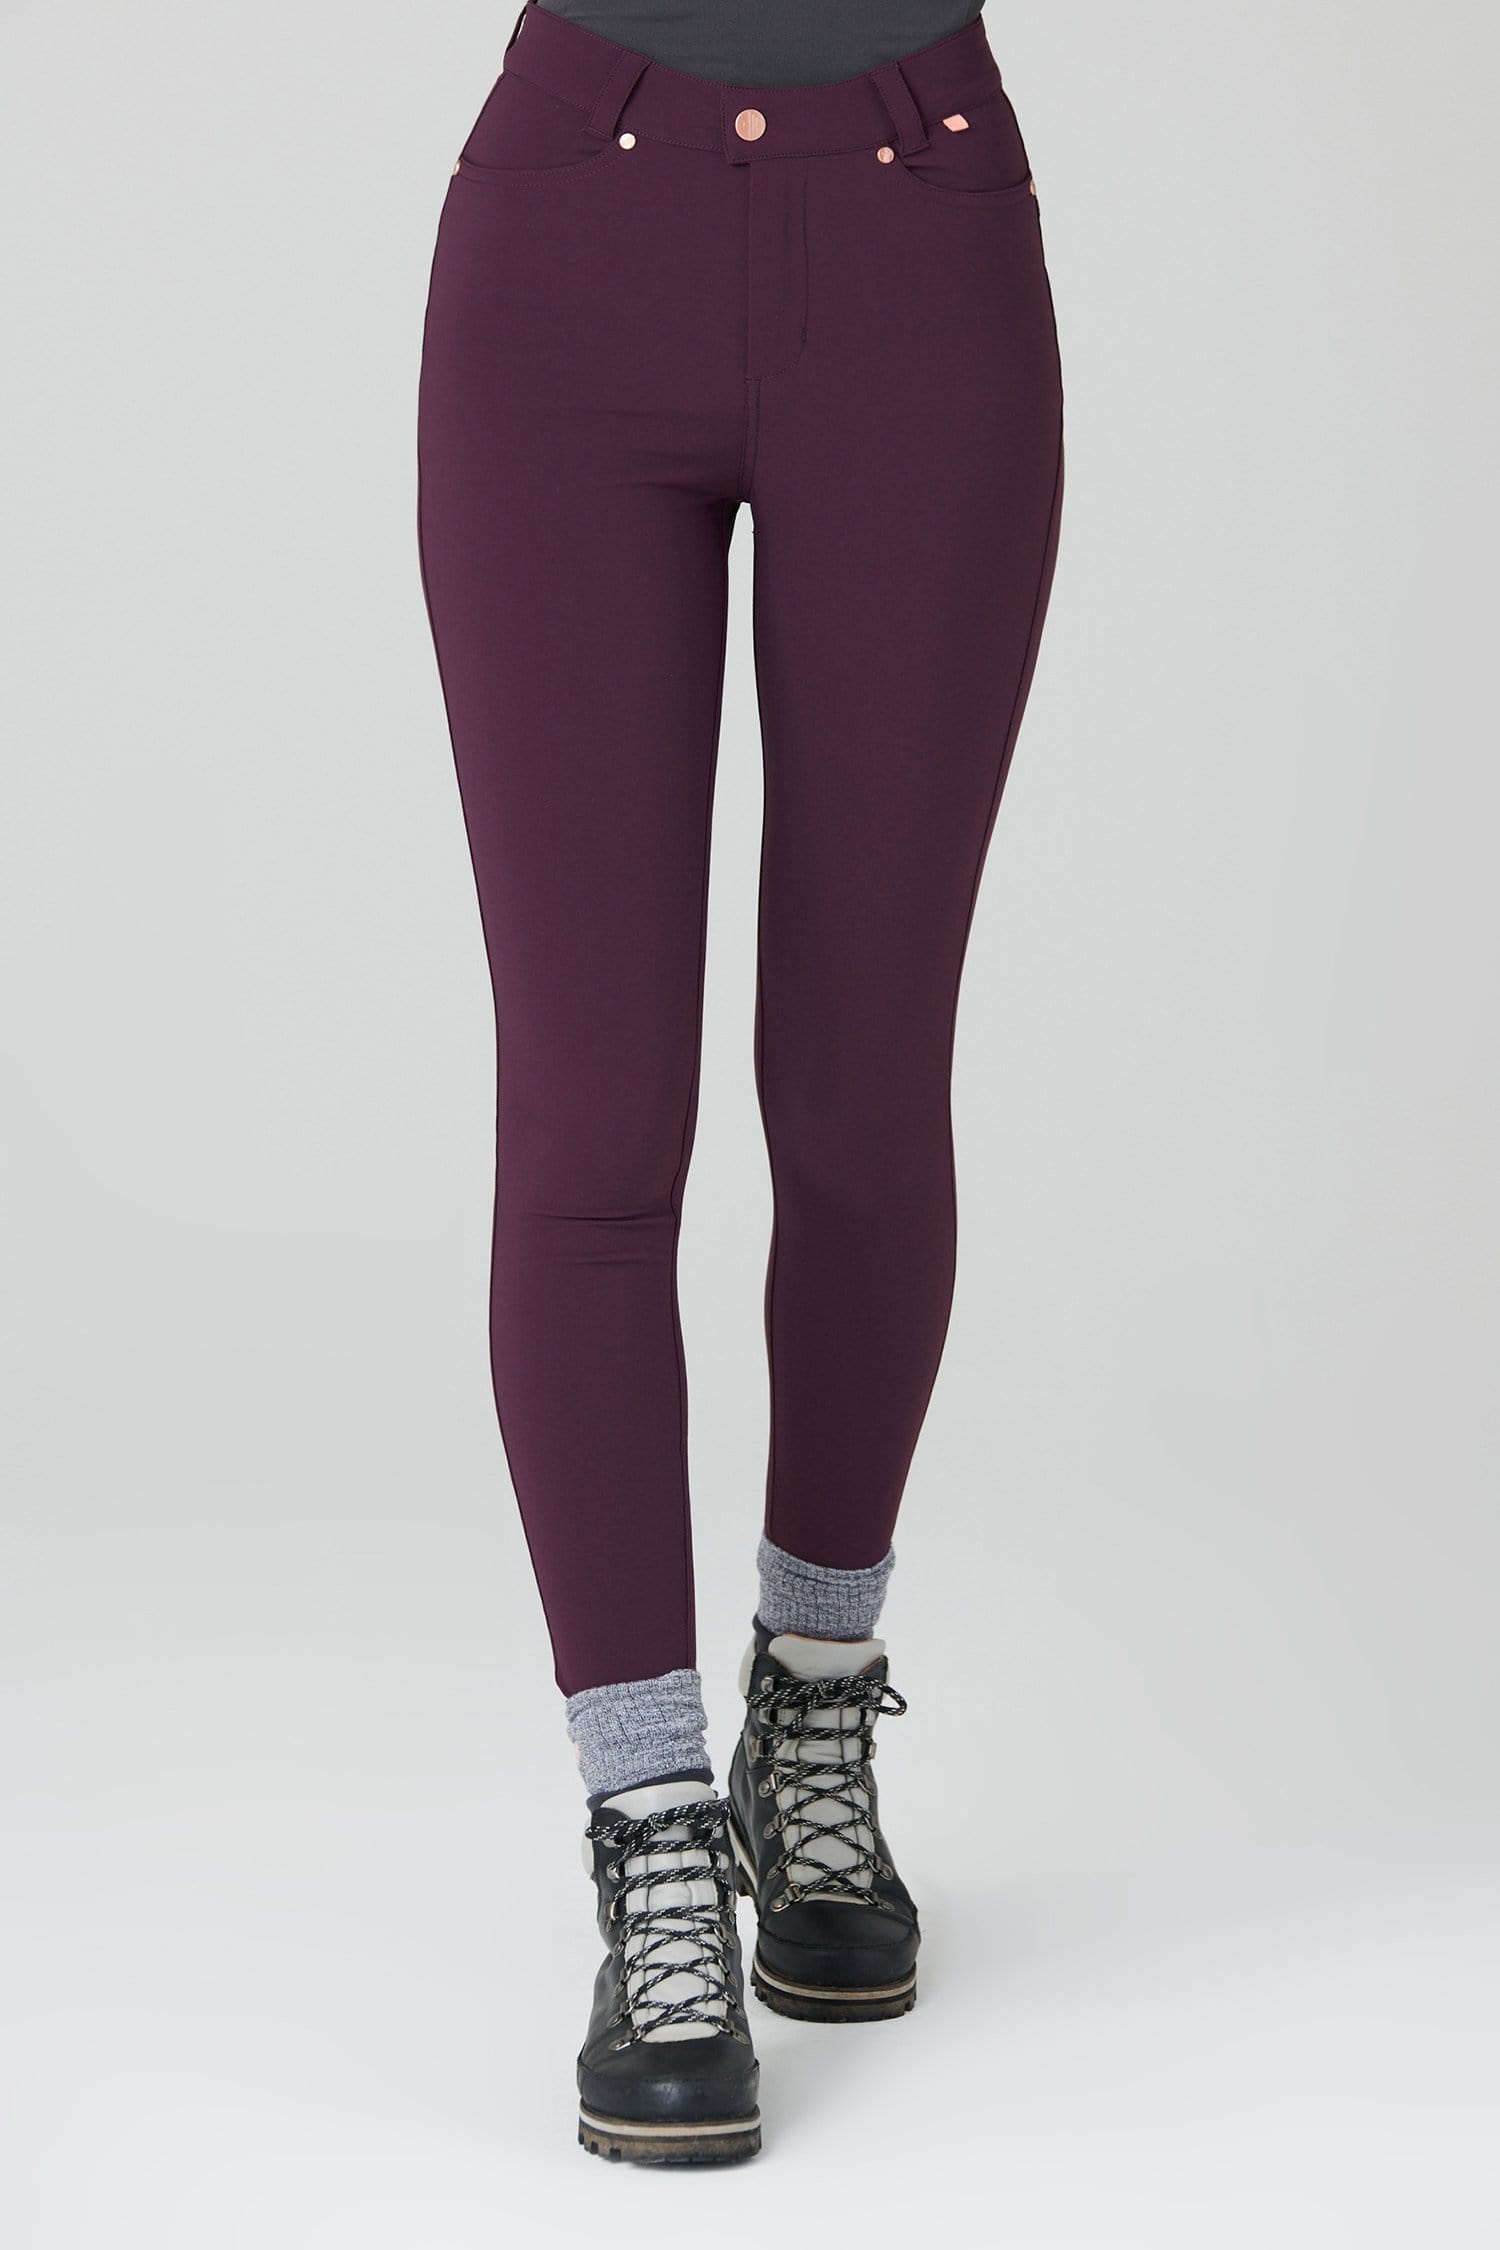 Max Stretch Skinny Outdoor Trousers - Aubergine - 32p / Uk14 - Womens - Acai Outdoorwear